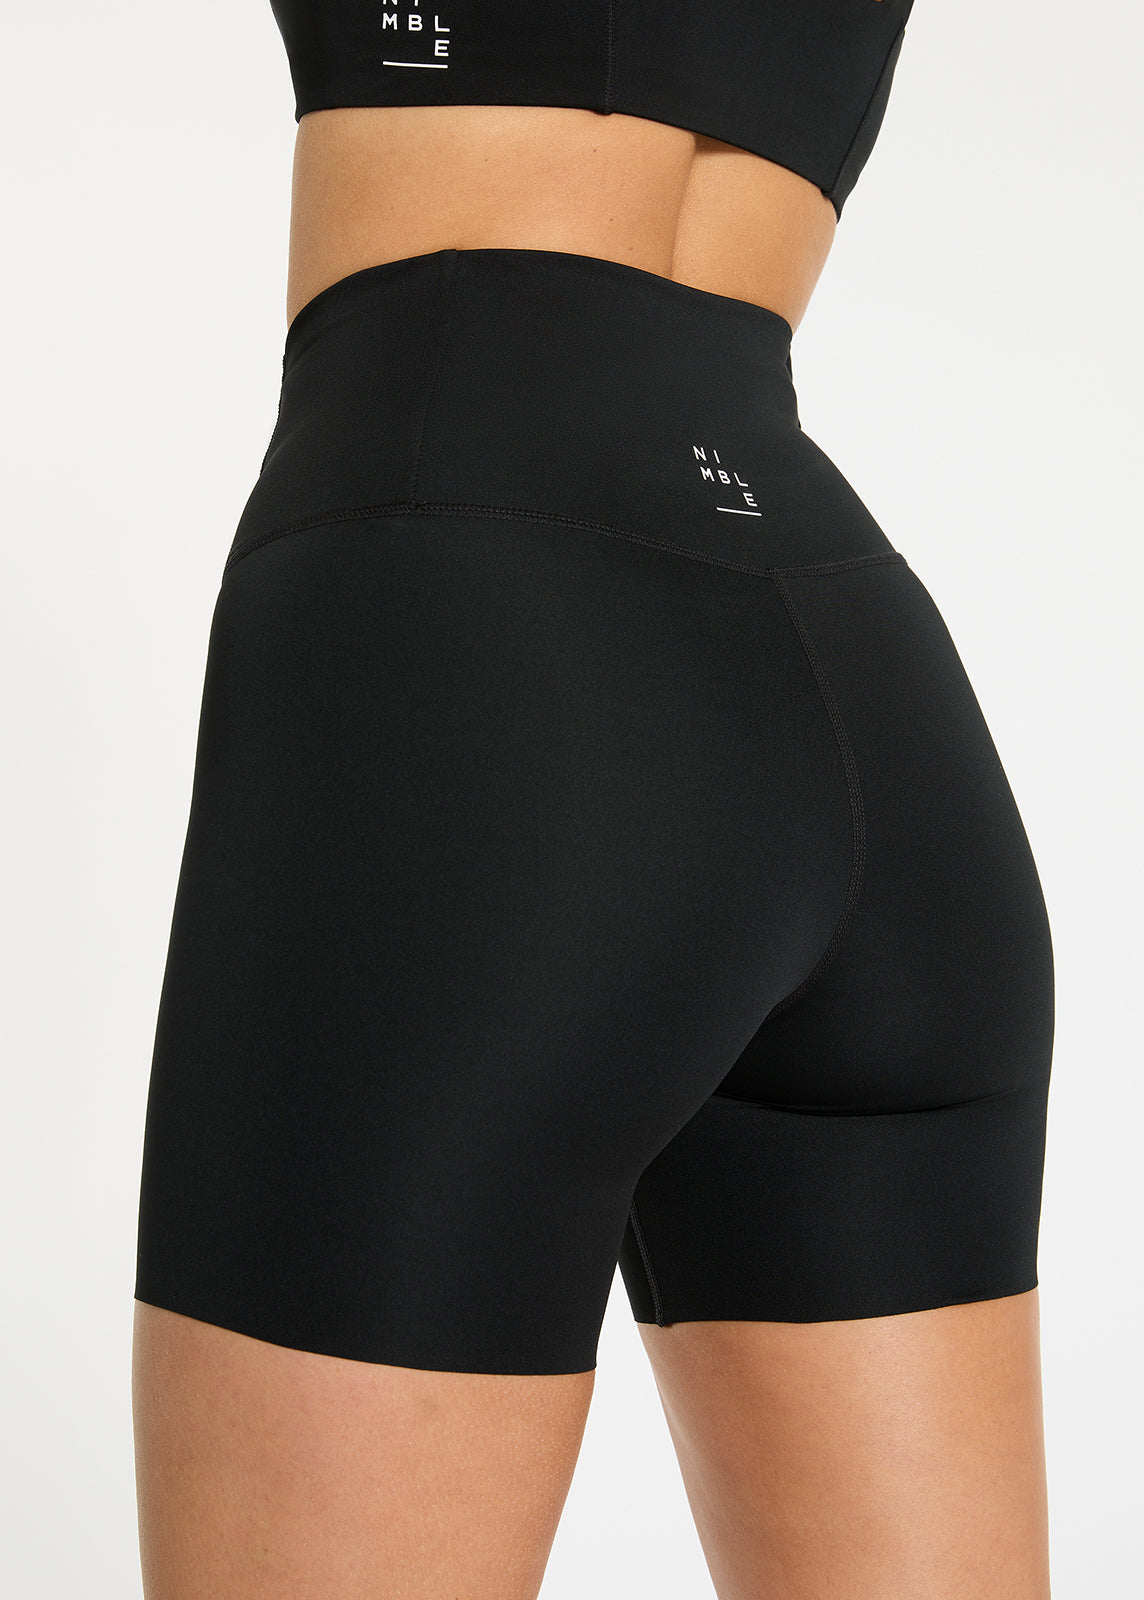 All in Motion Women's Sculpted Pull-On High Waisted Bike Shorts